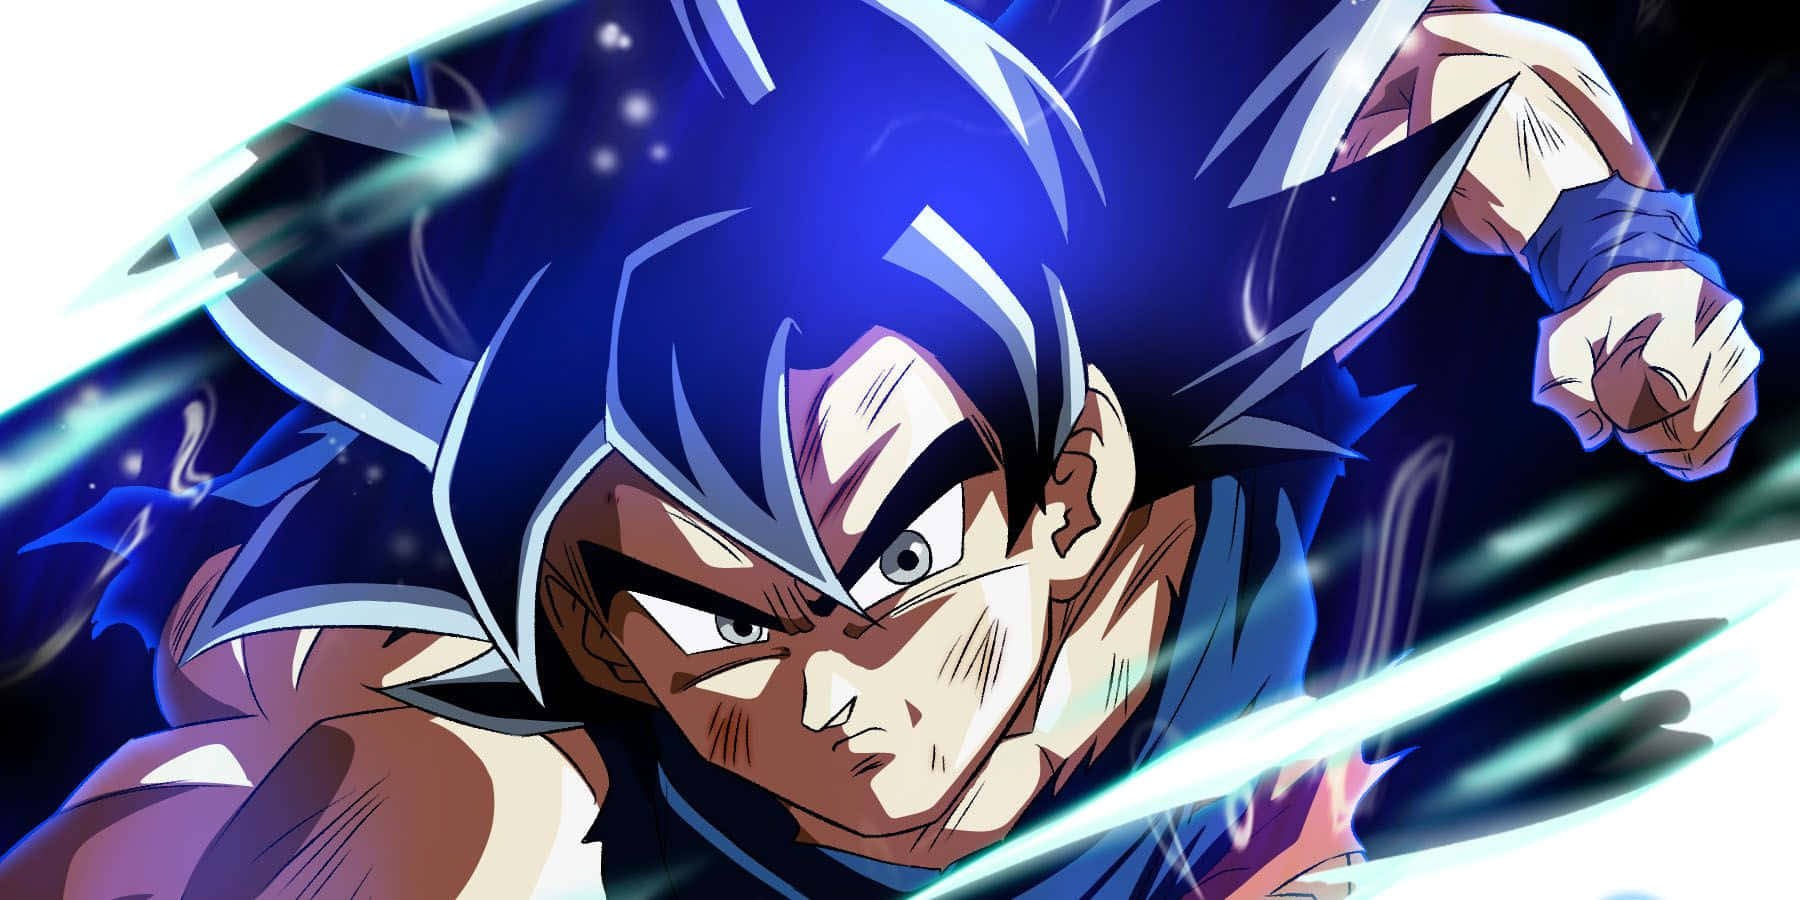 "Discover the Power of Ultra Instinct with Goku!"